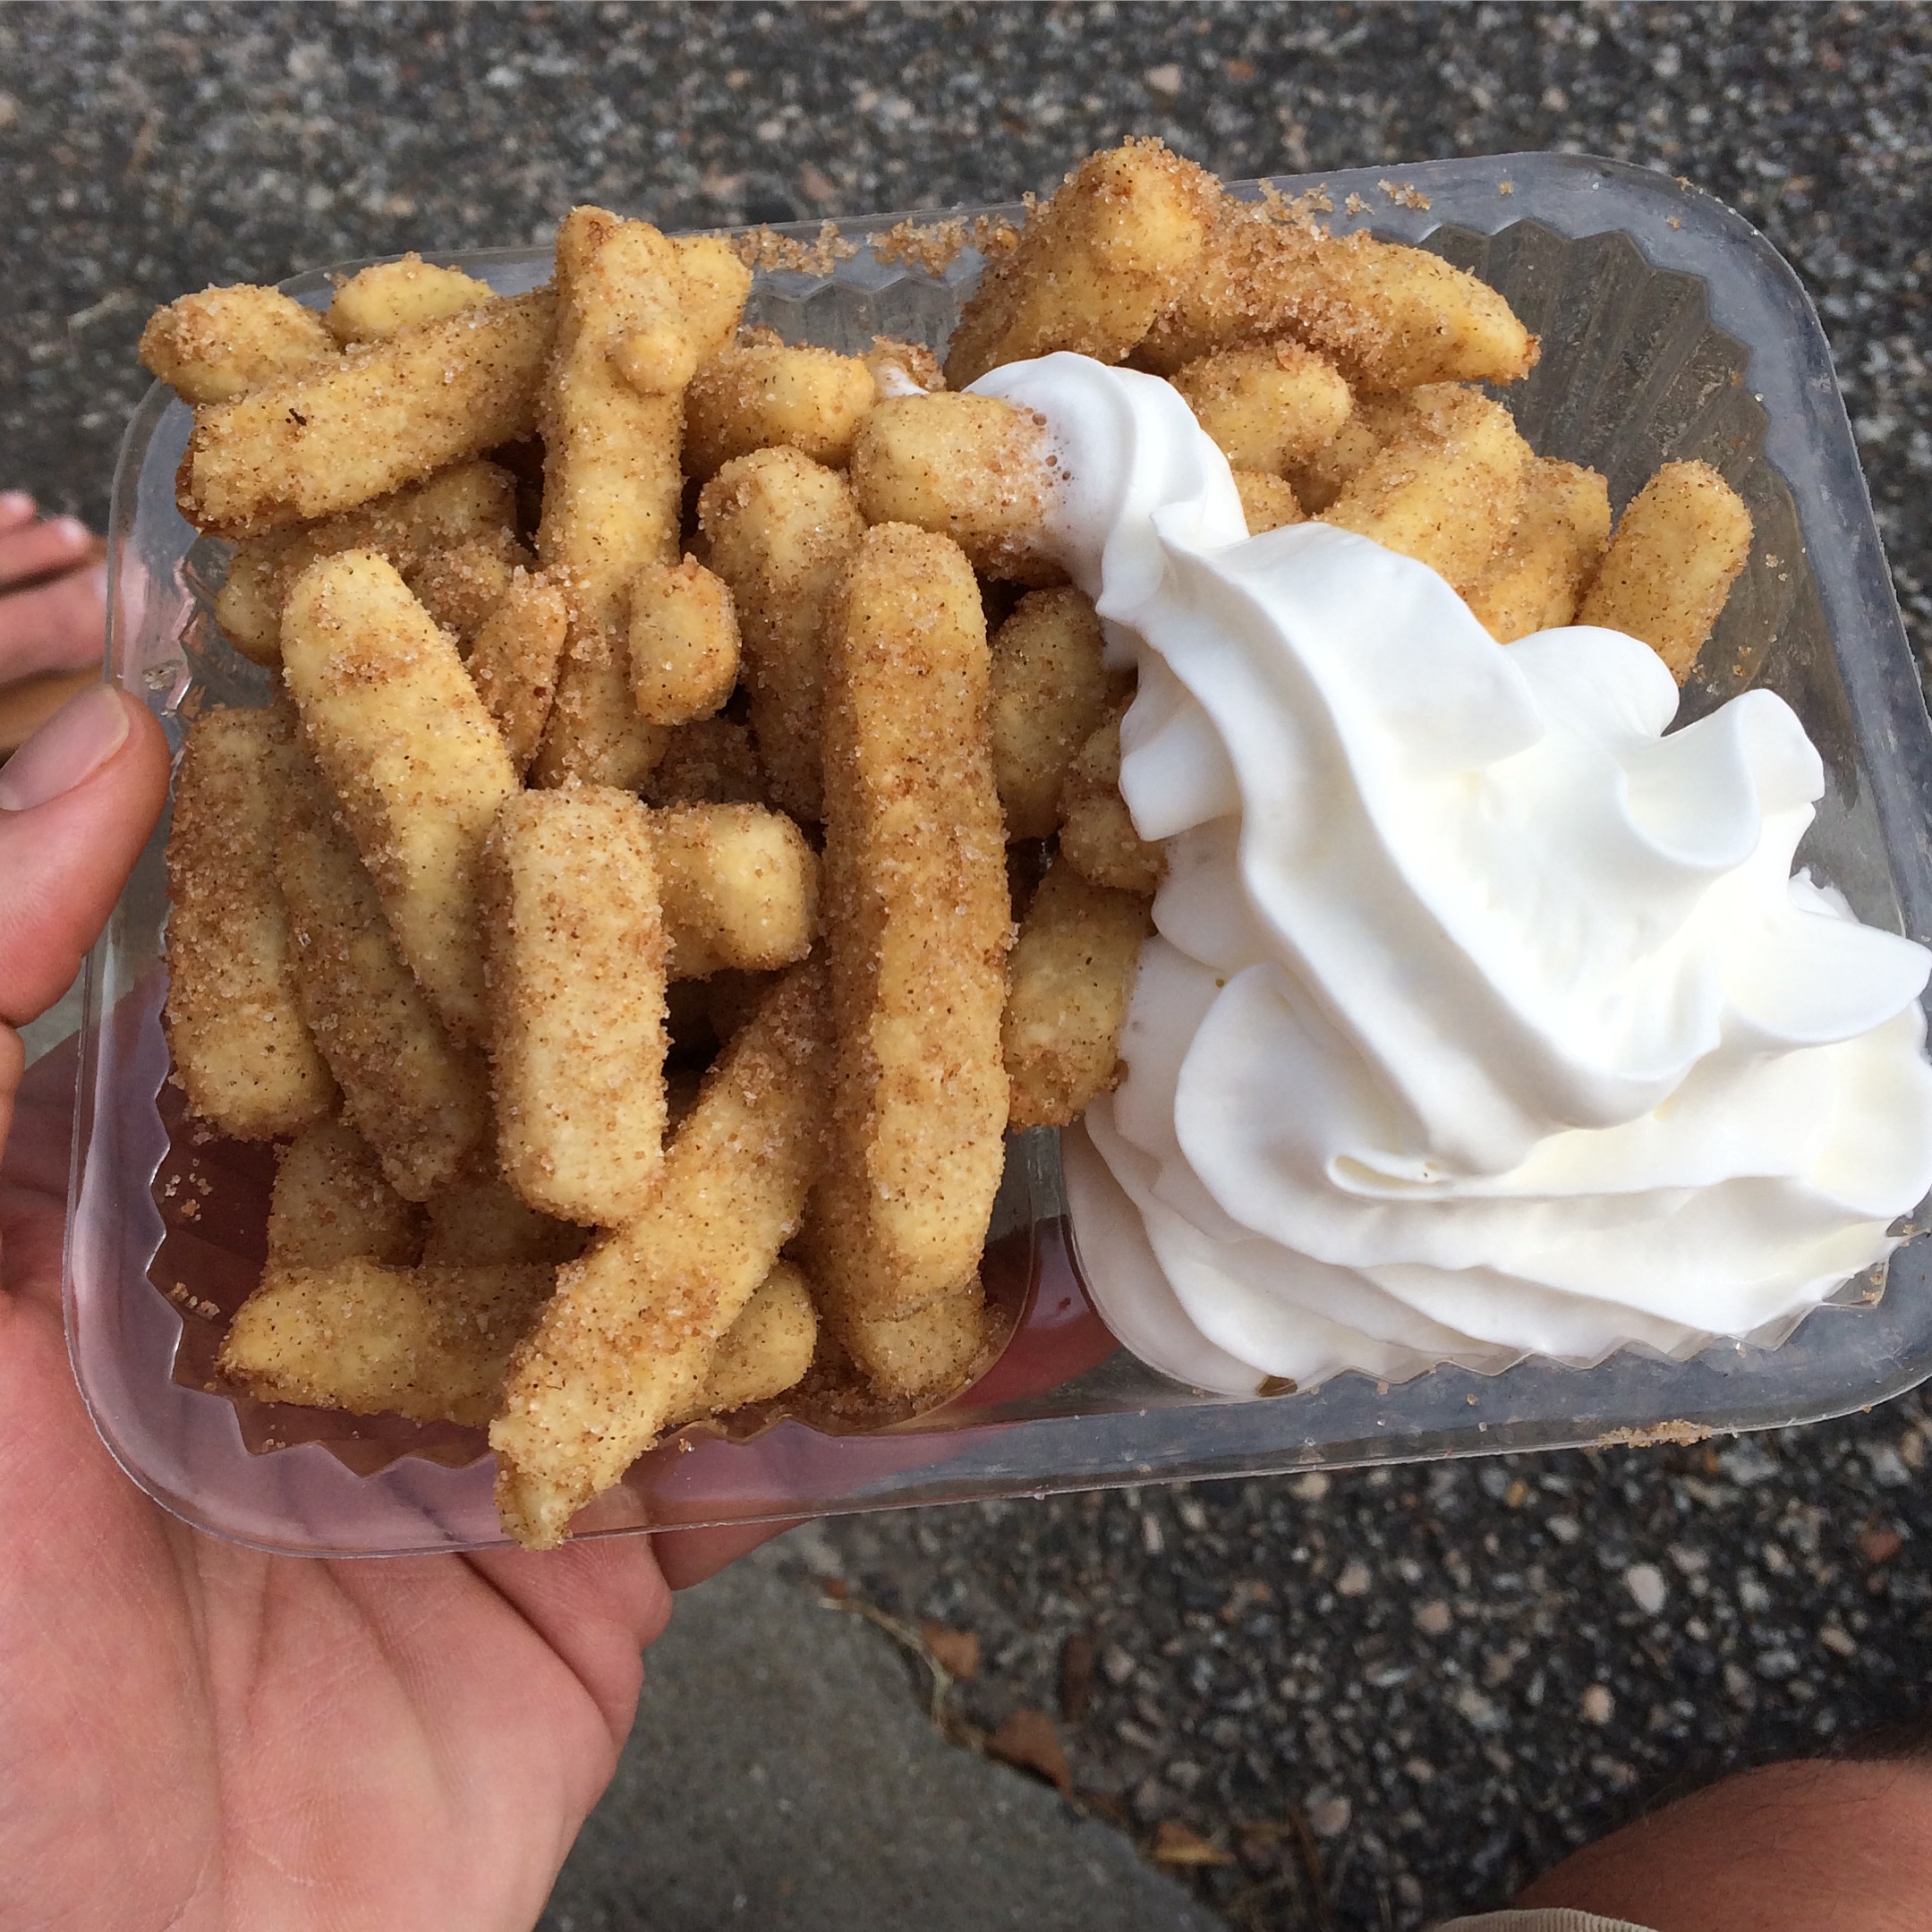 These were the apple fries we enjoyed last Saturday.